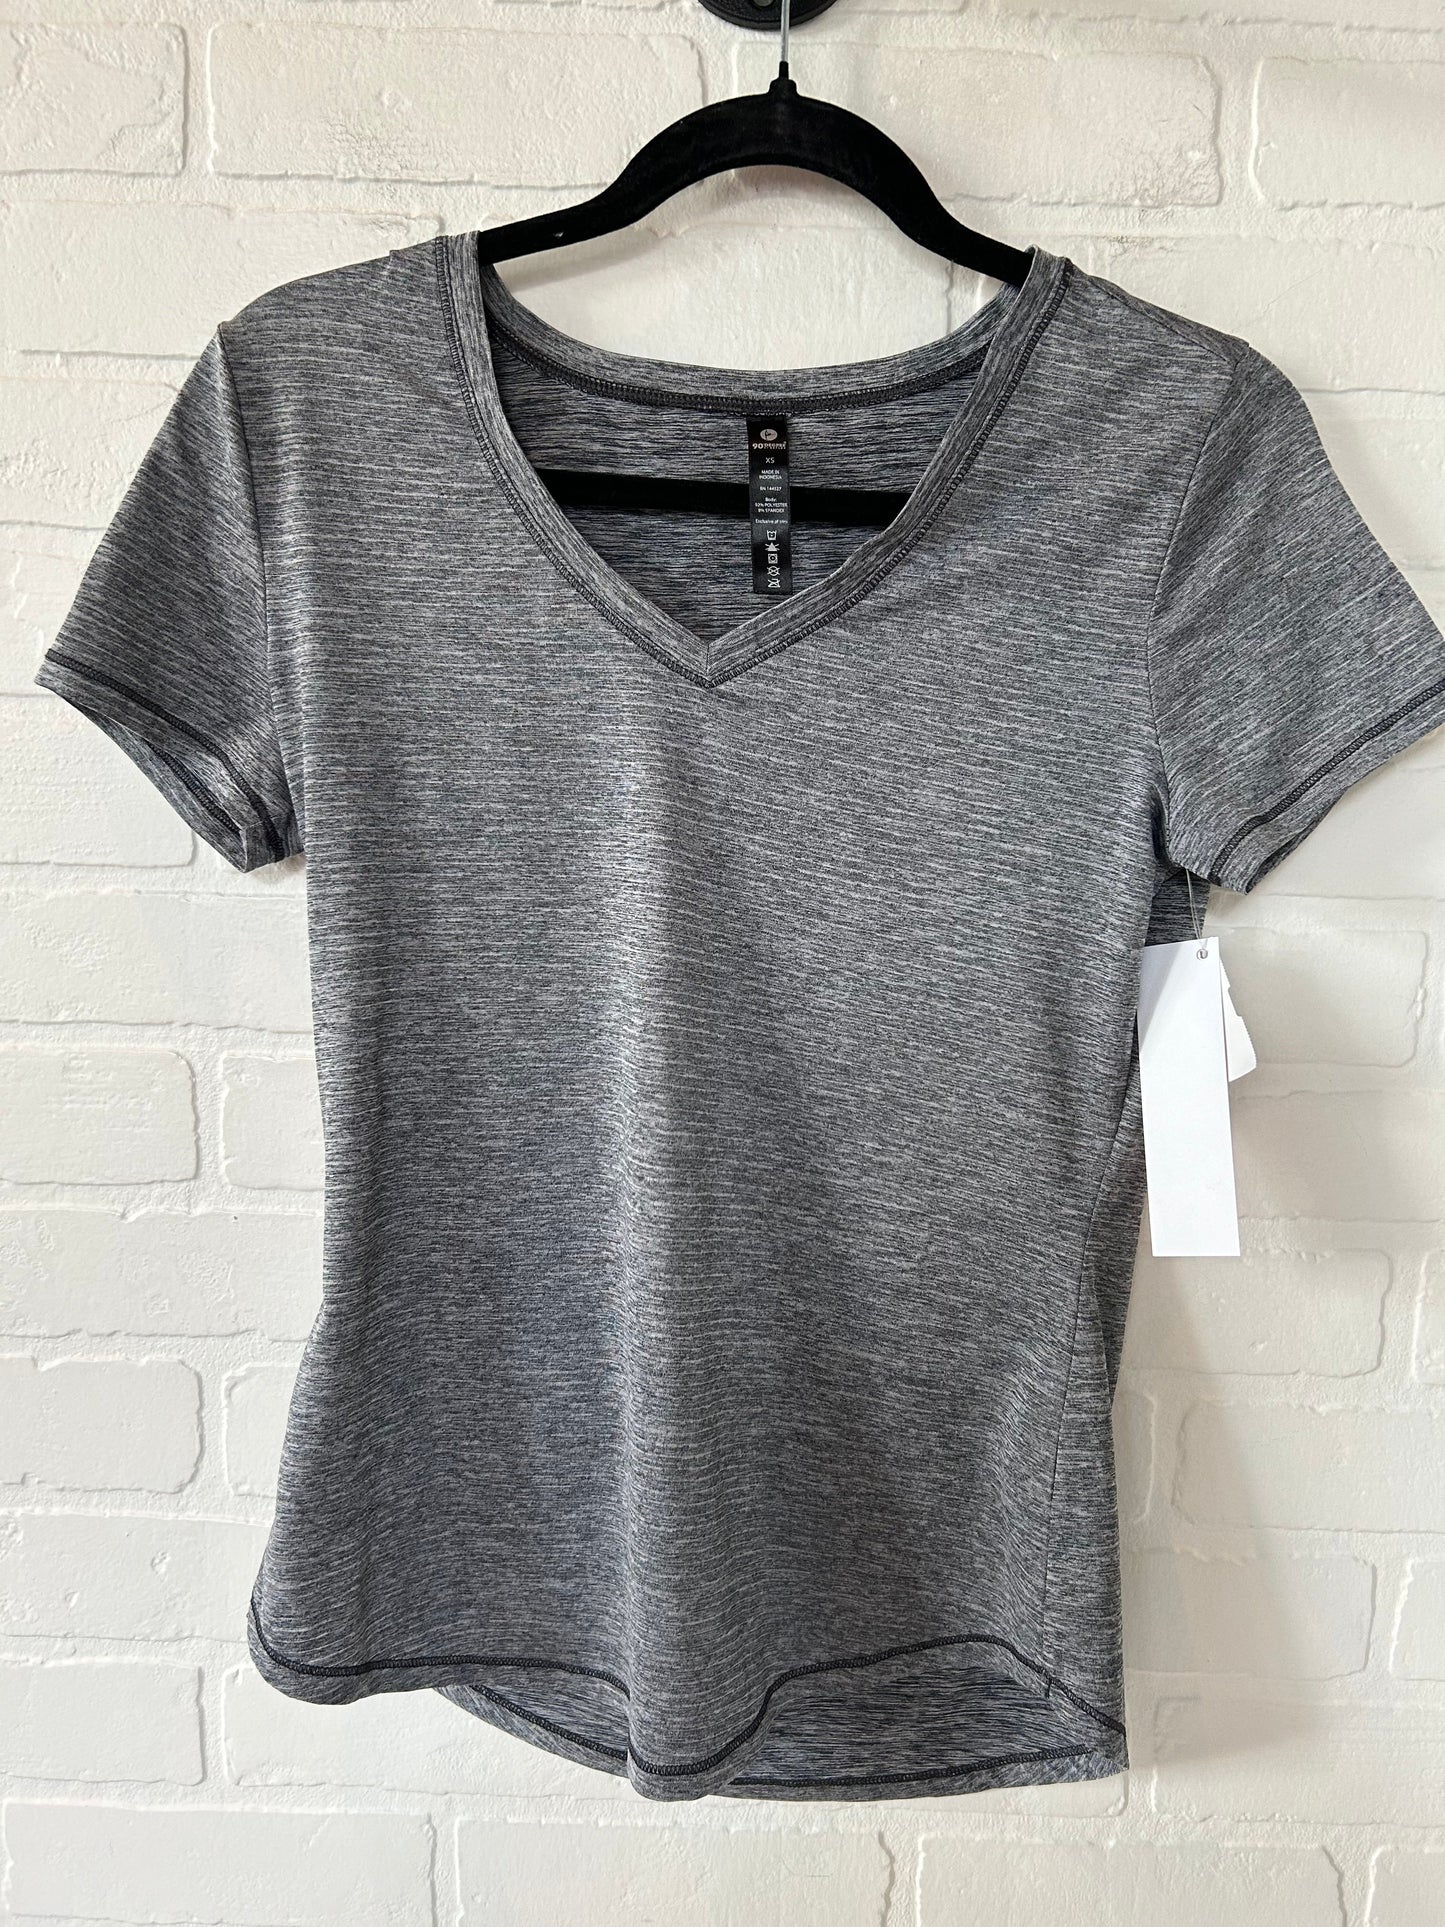 Grey Top Short Sleeve 90 Degrees By Reflex, Size Xs